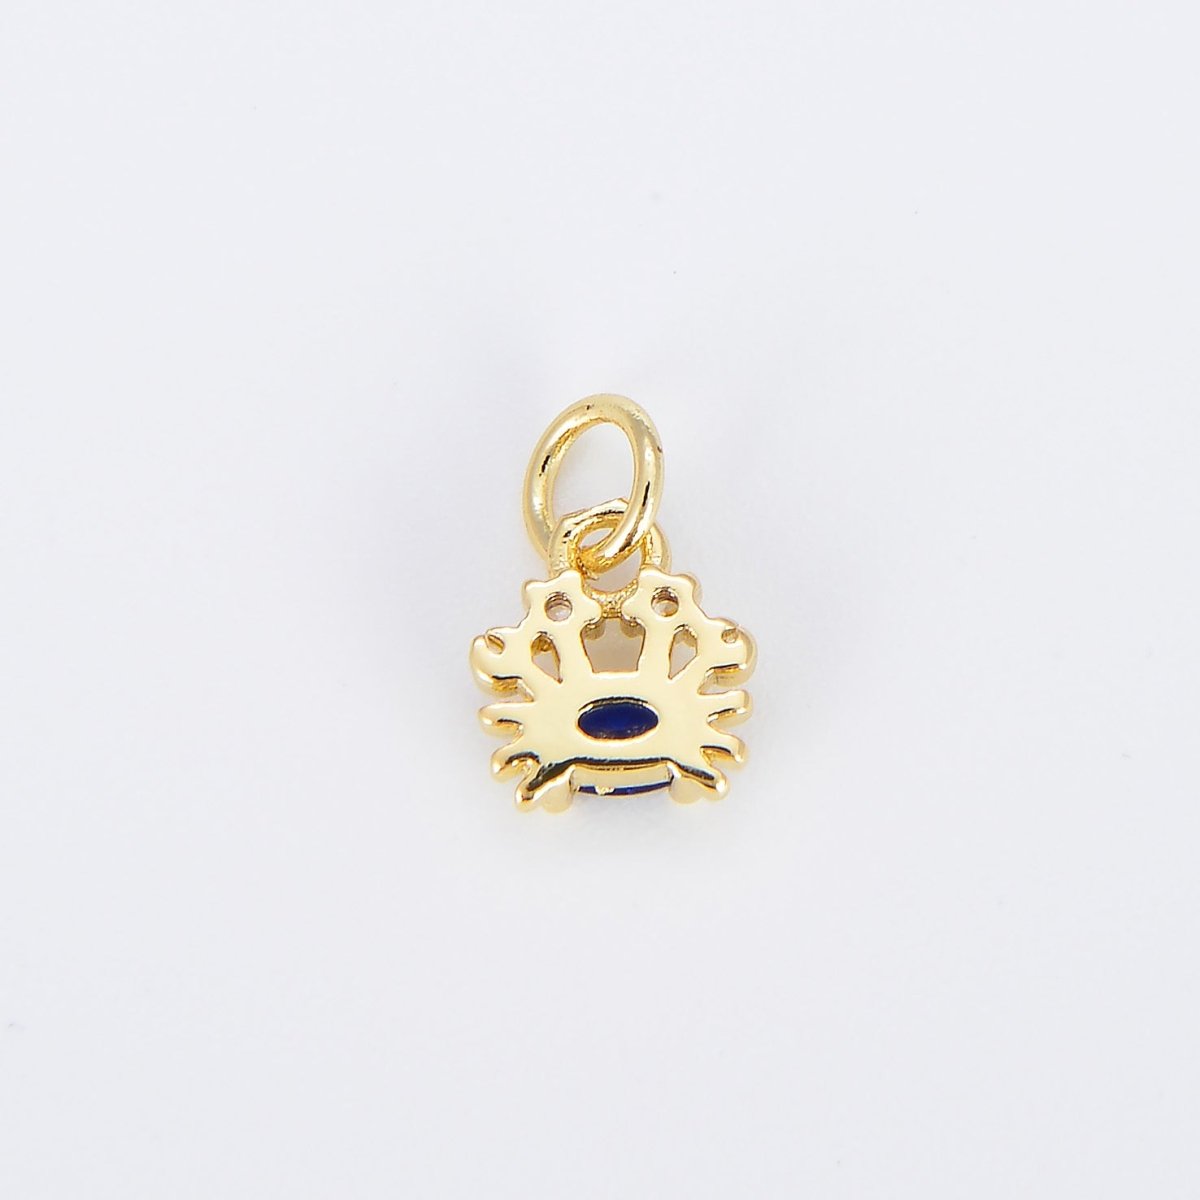 Tiny Crab Charm Dainty Crabby Pendant 14kt Gold Filled Charm Animal Charm Cubic Blue Under the sea Inspired E-875 - DLUXCA